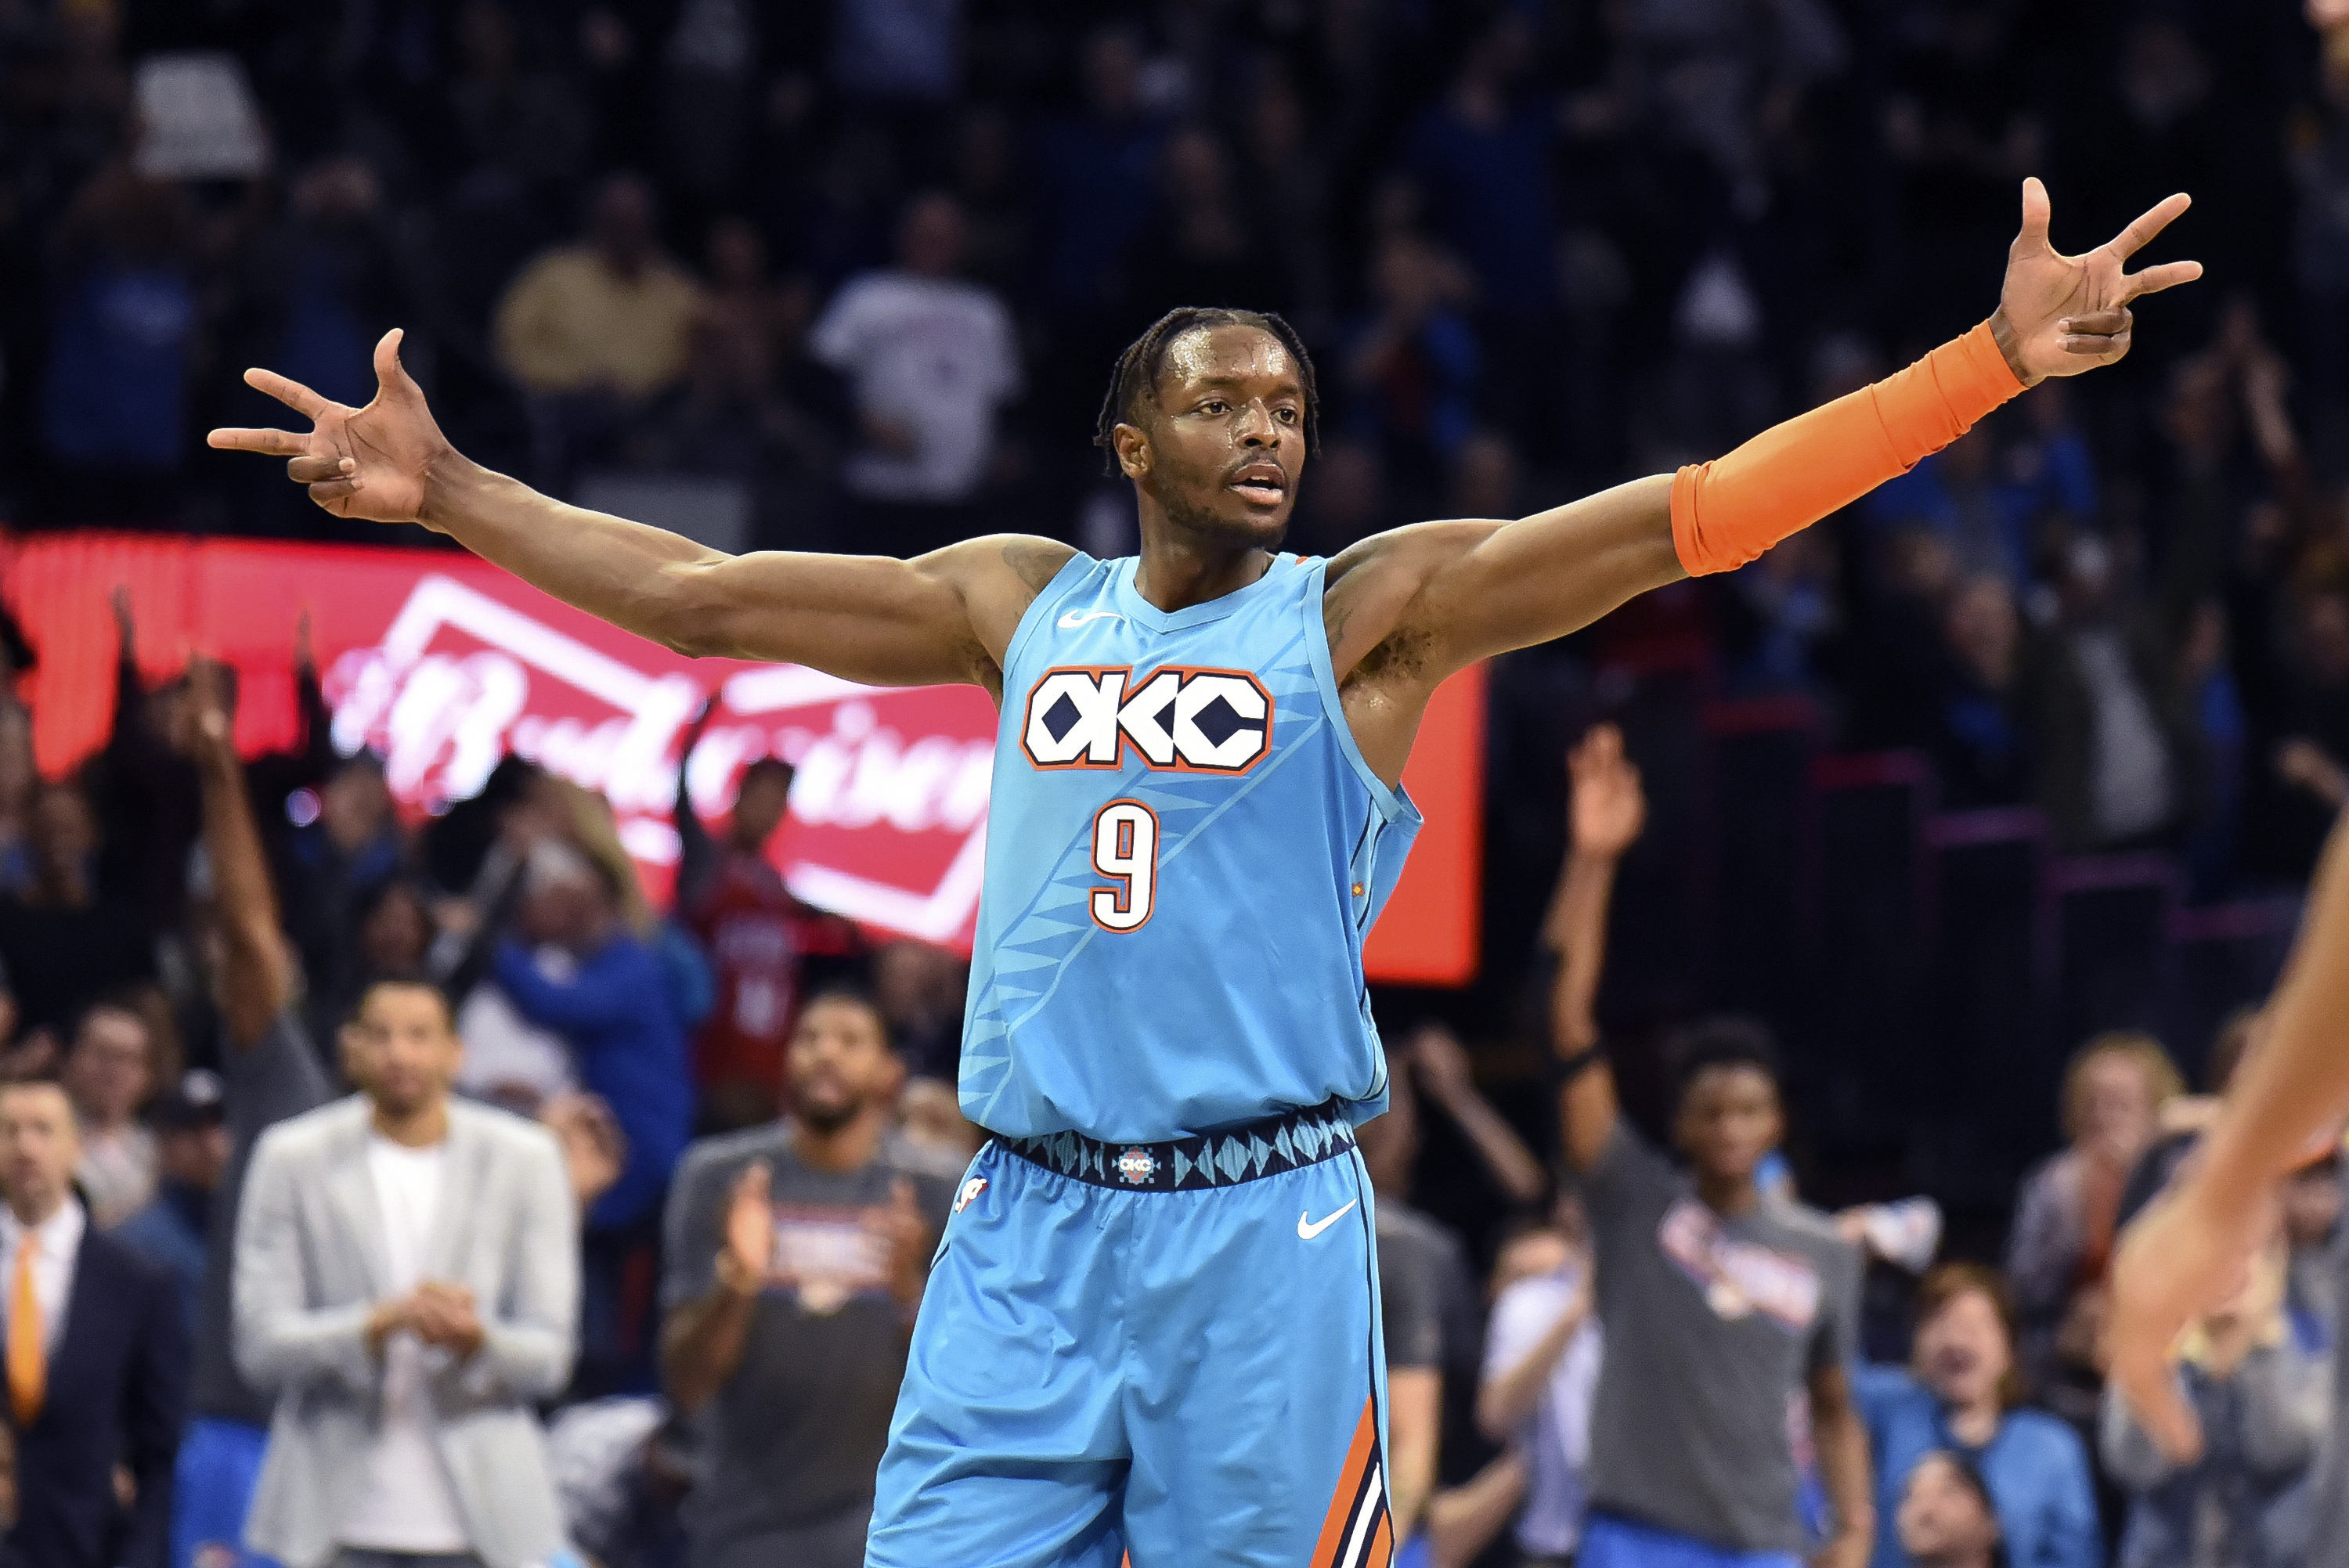 Woj Thunder Trade Jerami Grant To Nuggets For 2020 1st Rounder After Pg13 Deal Bleacher Report Latest News Videos And Highlights